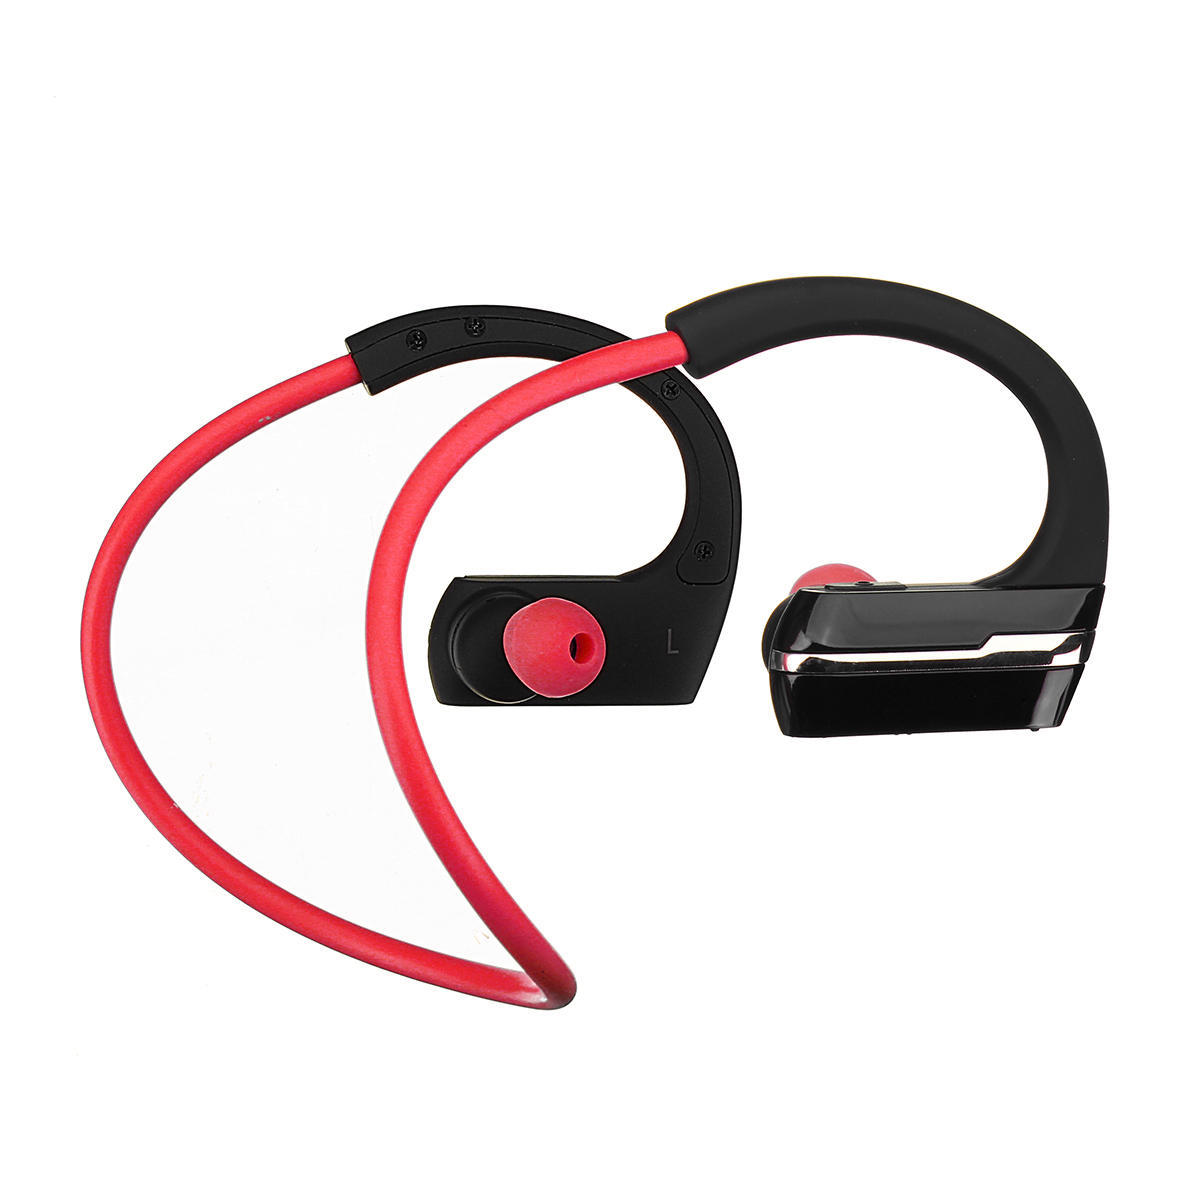 Sports Wireless bluetooth Headset Headphone Noise Cancelling Waterproof Earphone Stereo Earbuds with Mic